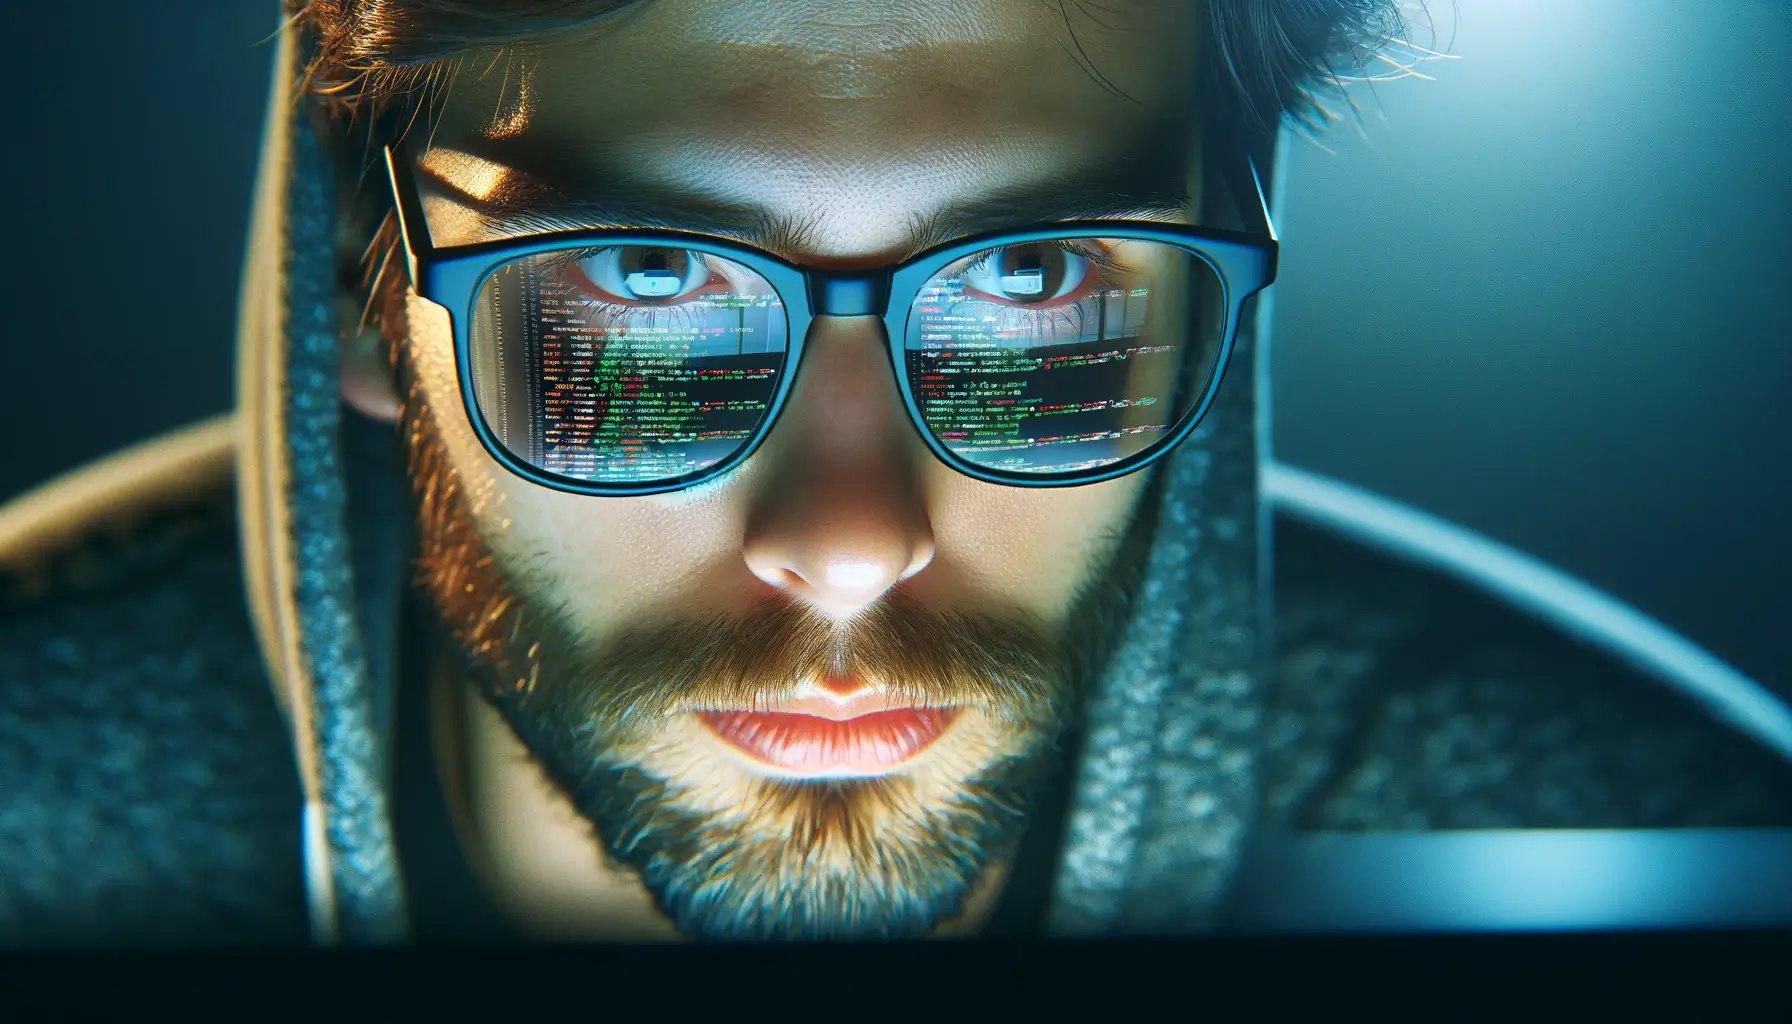 A close-up portrait of a software engineer working on a computer